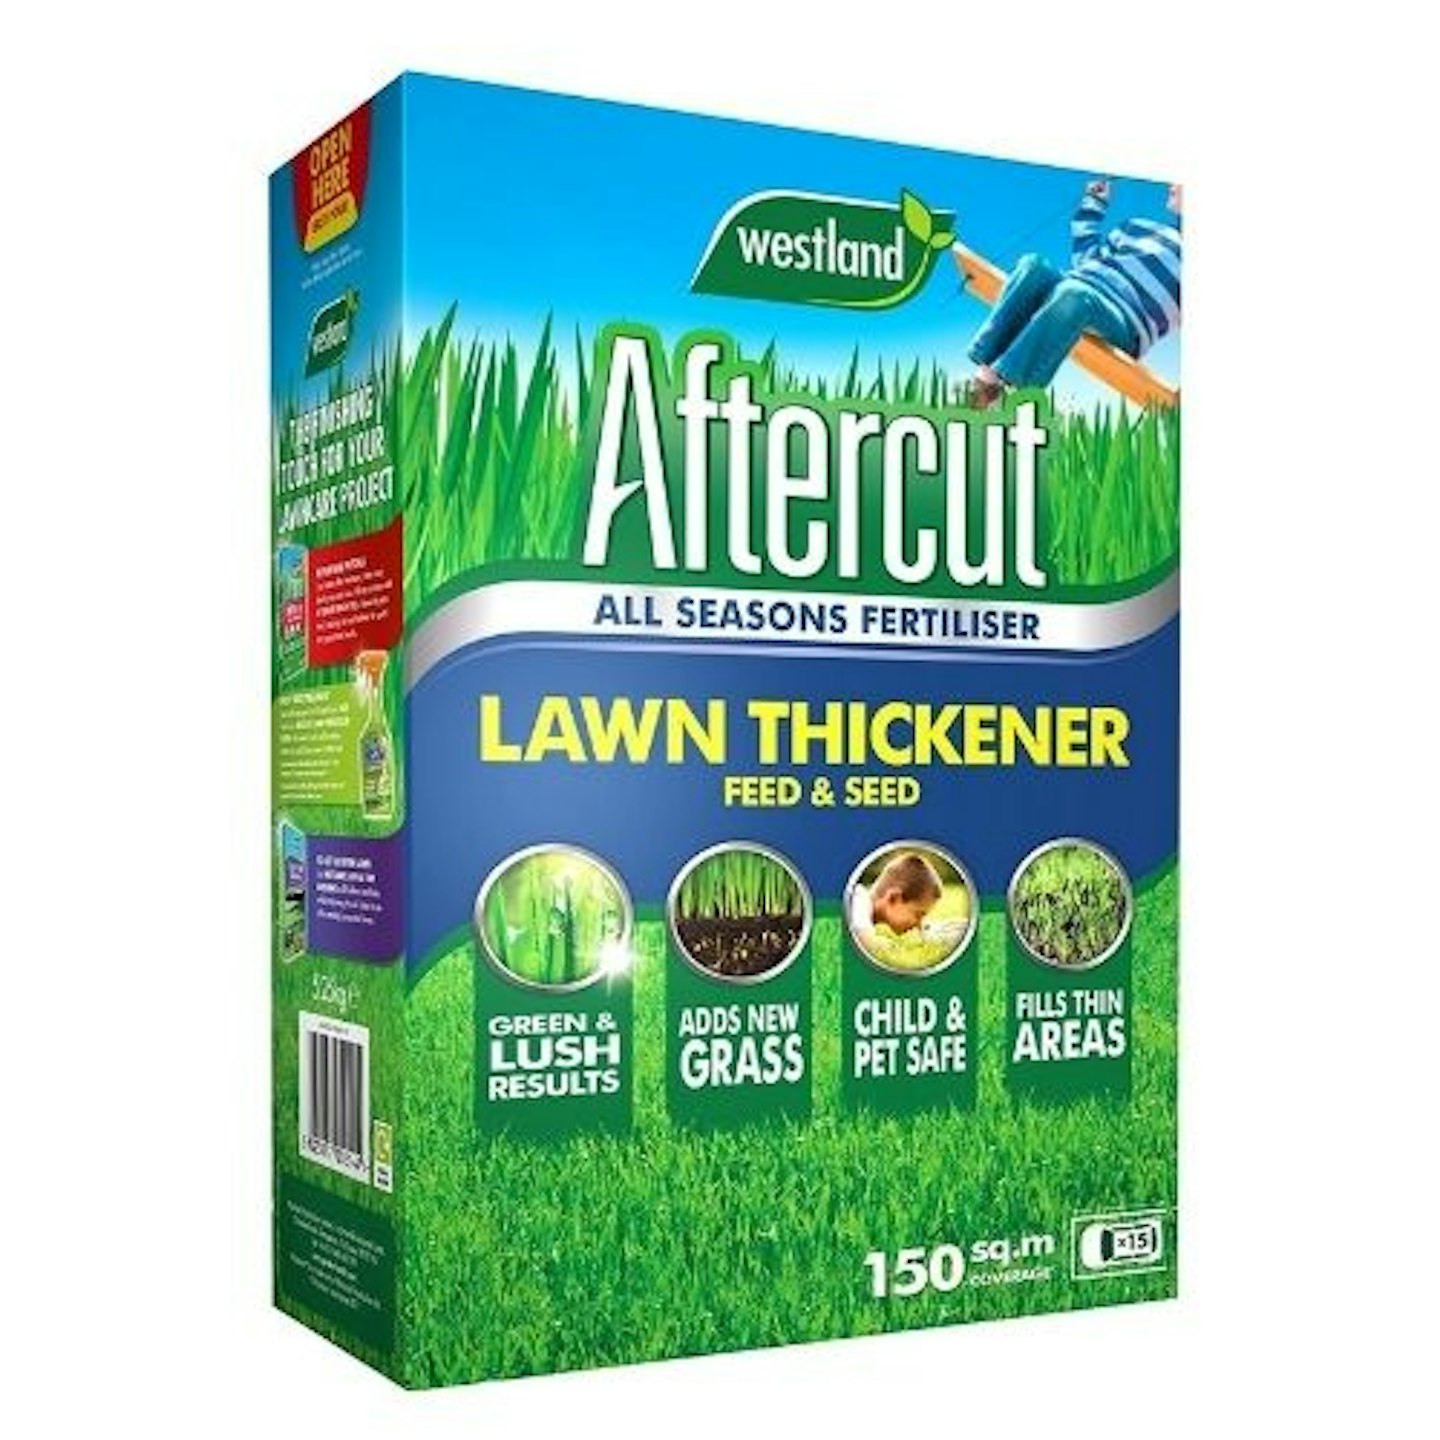 aftercut Lawn Thickener Feed and Seed